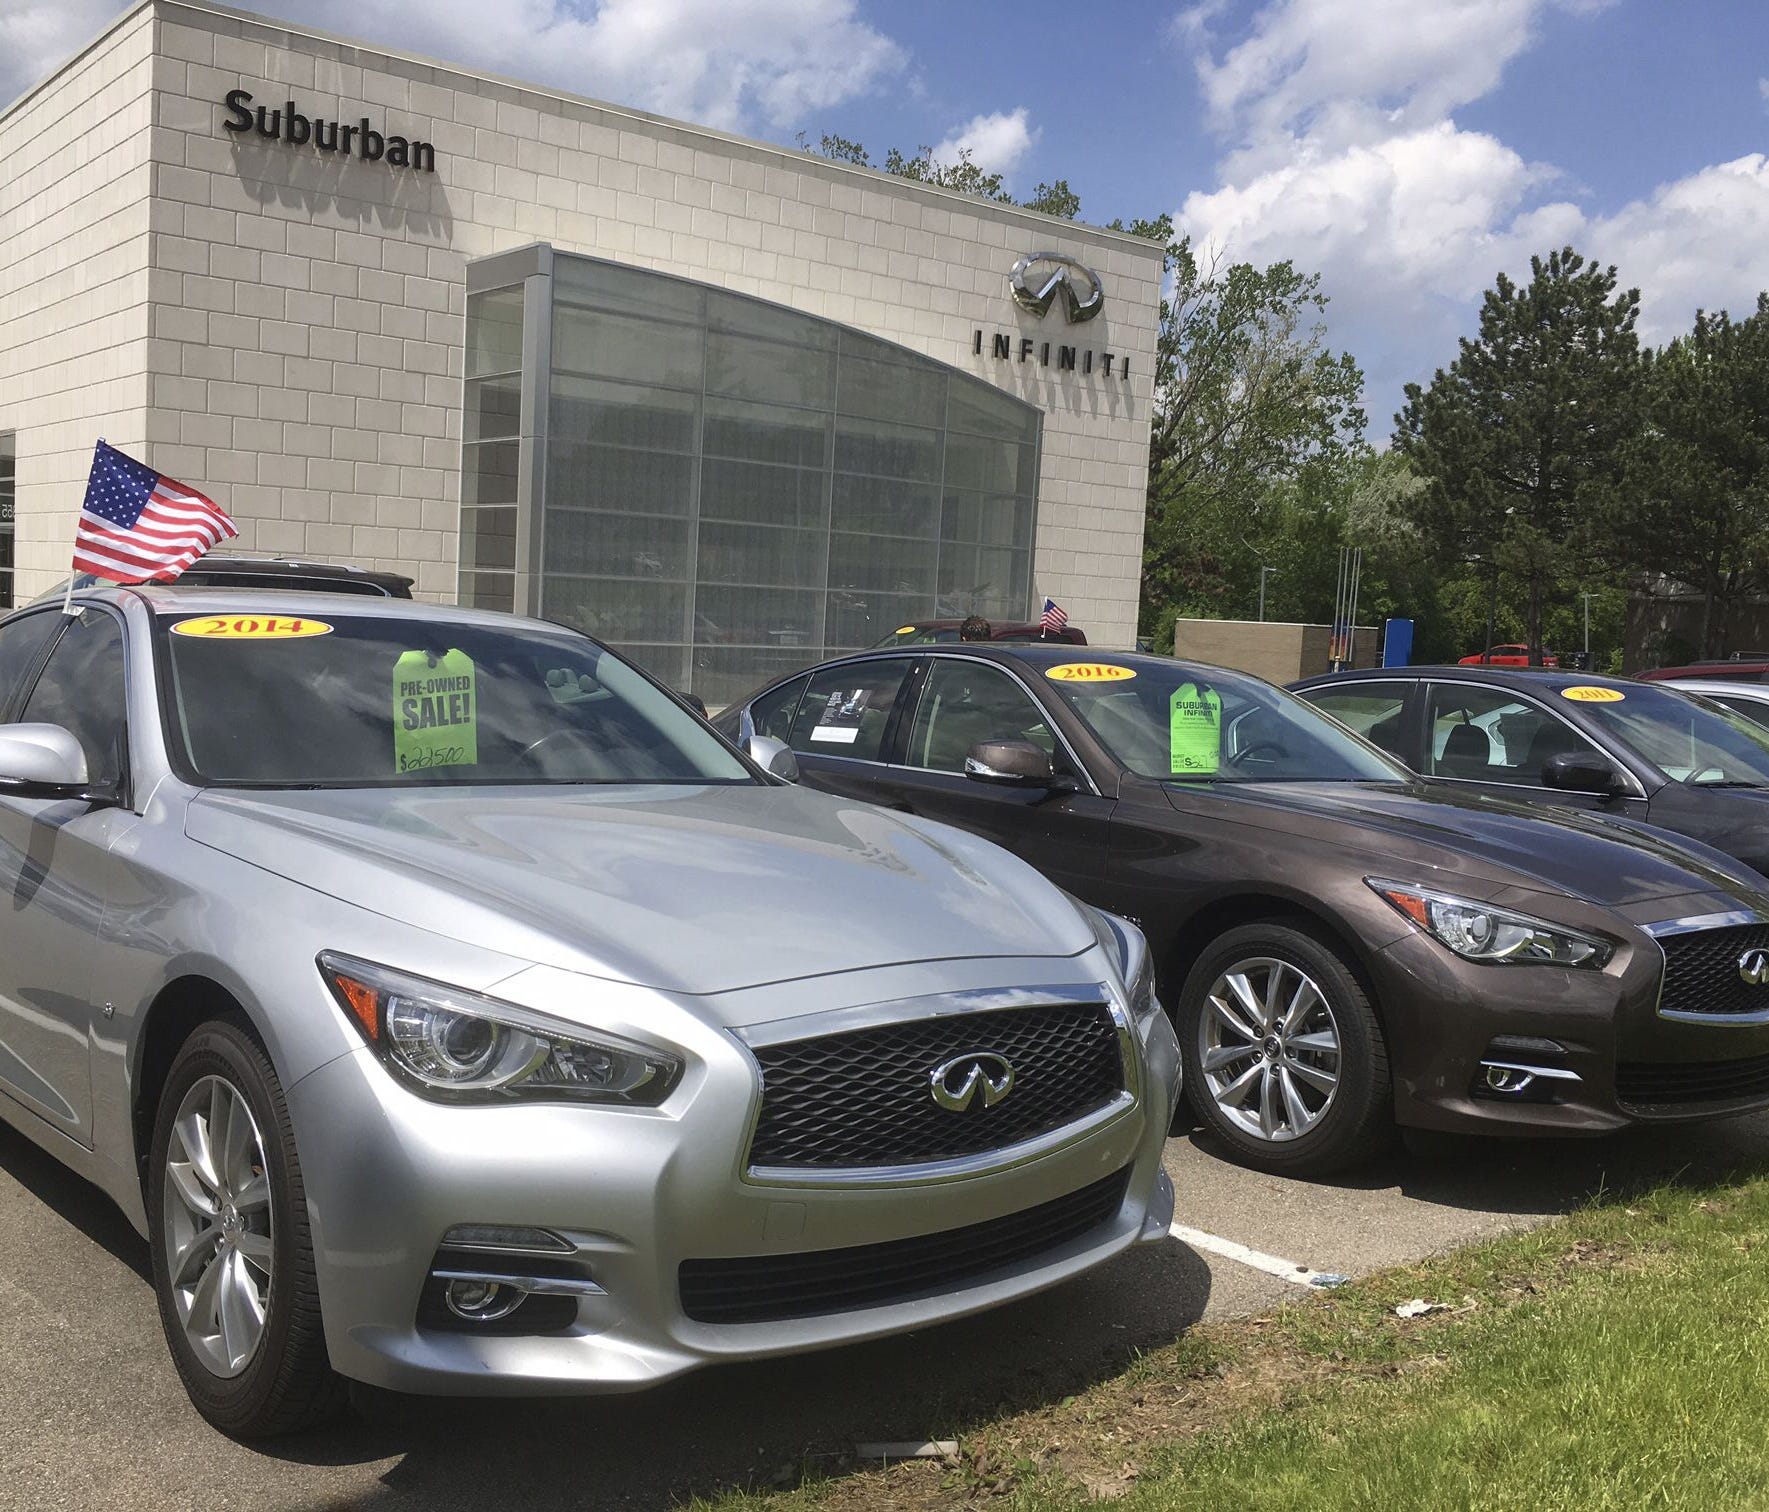 Used Infiniti Q50 luxury sedans await buyers at a dealership in the Detroit suburb of Novi, Mich. Leases are ending on a large number of Q50s and other cars, flooding the market with quality used cars.